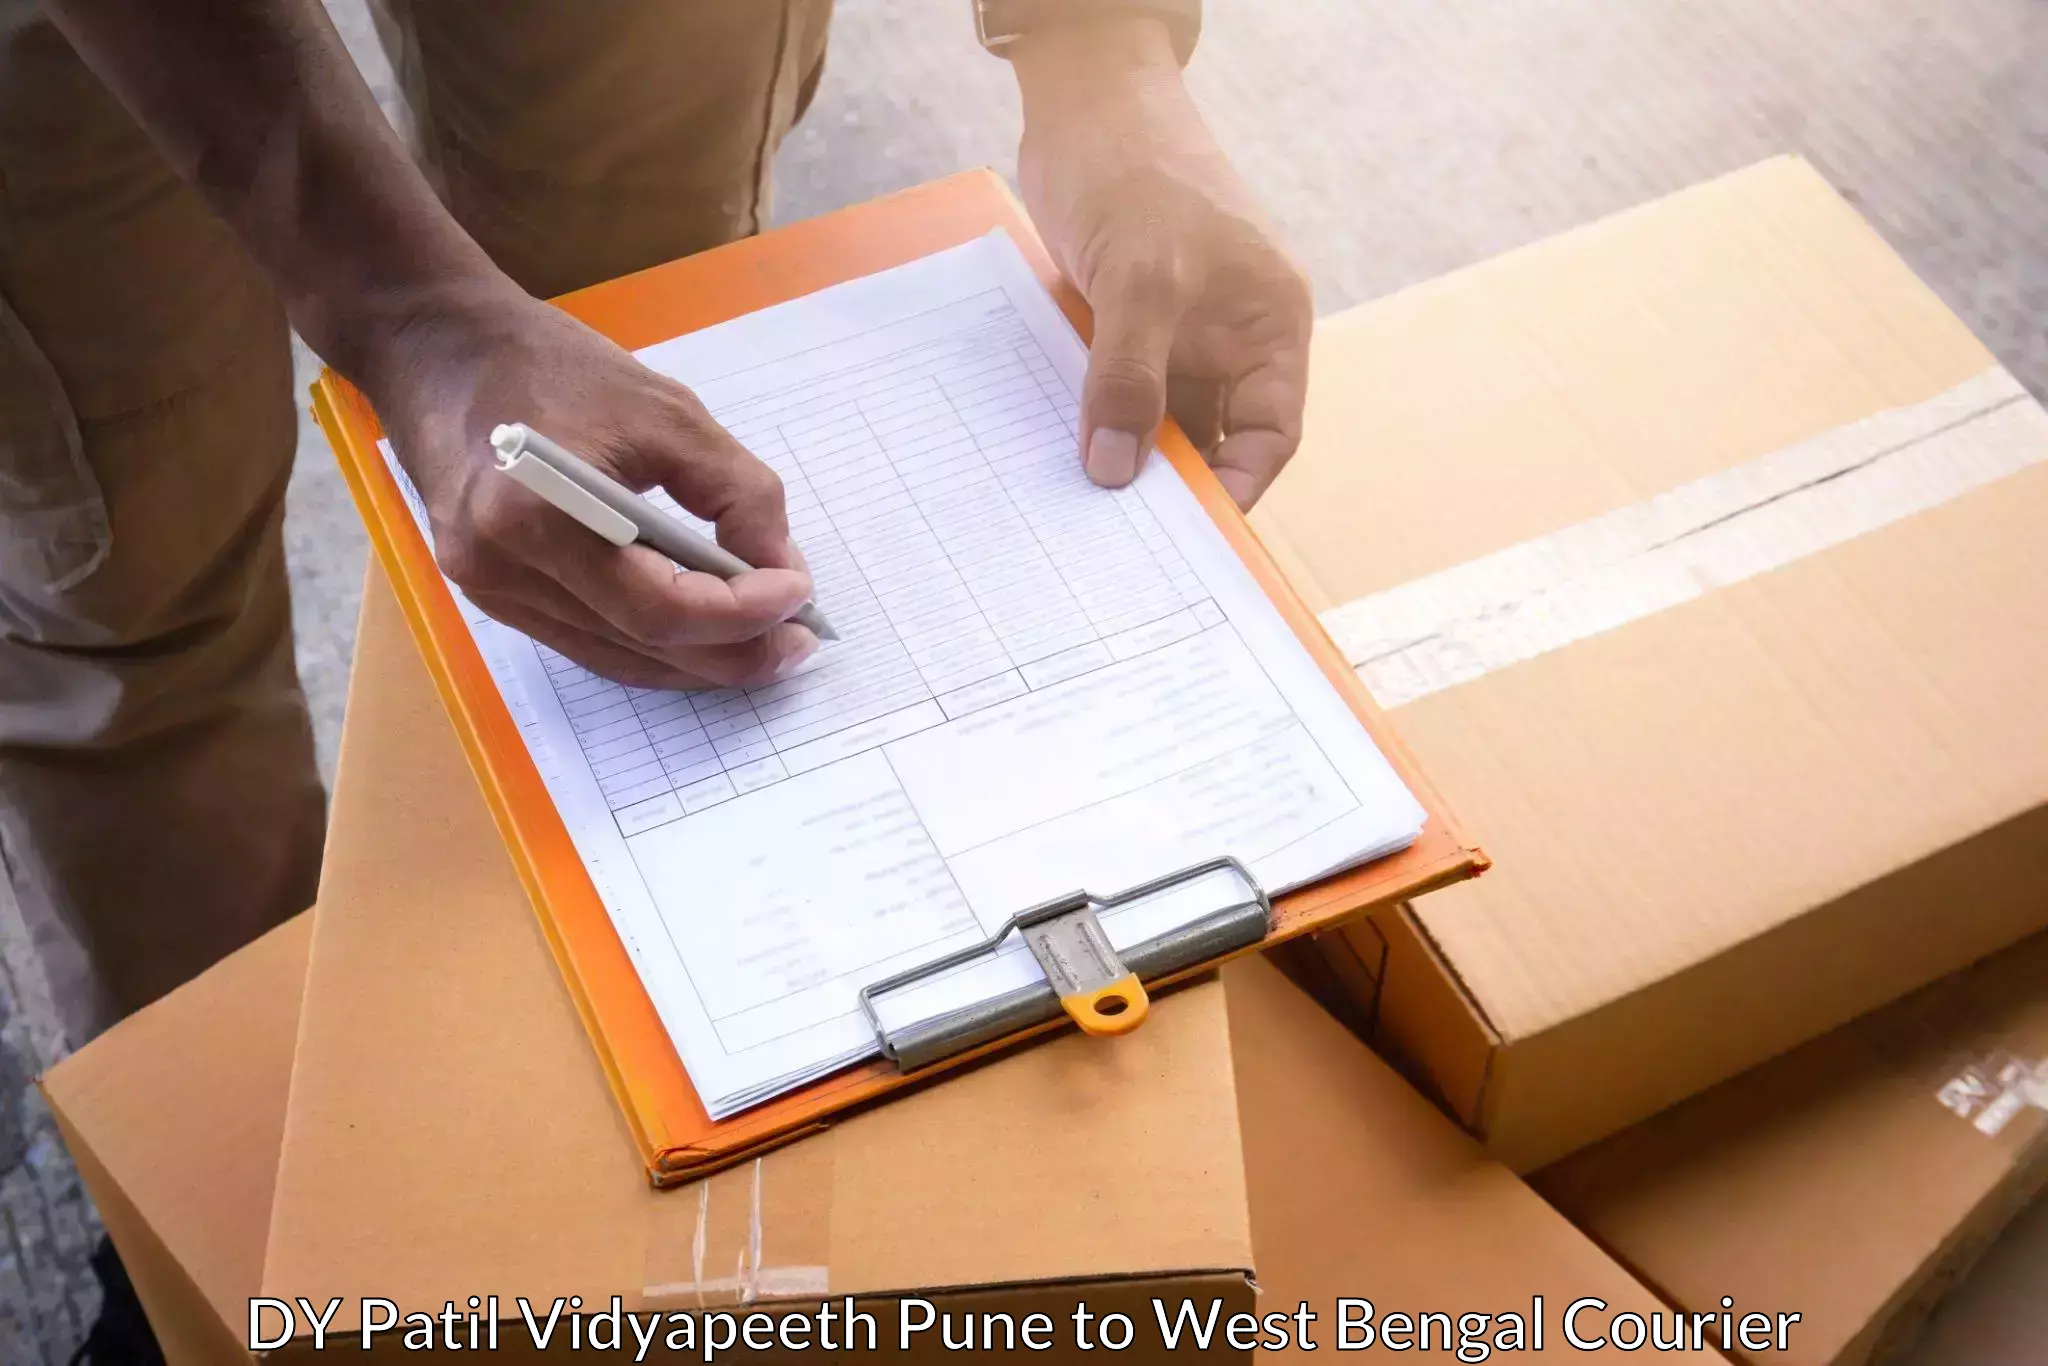 Personal parcel delivery DY Patil Vidyapeeth Pune to Chandrakona Road